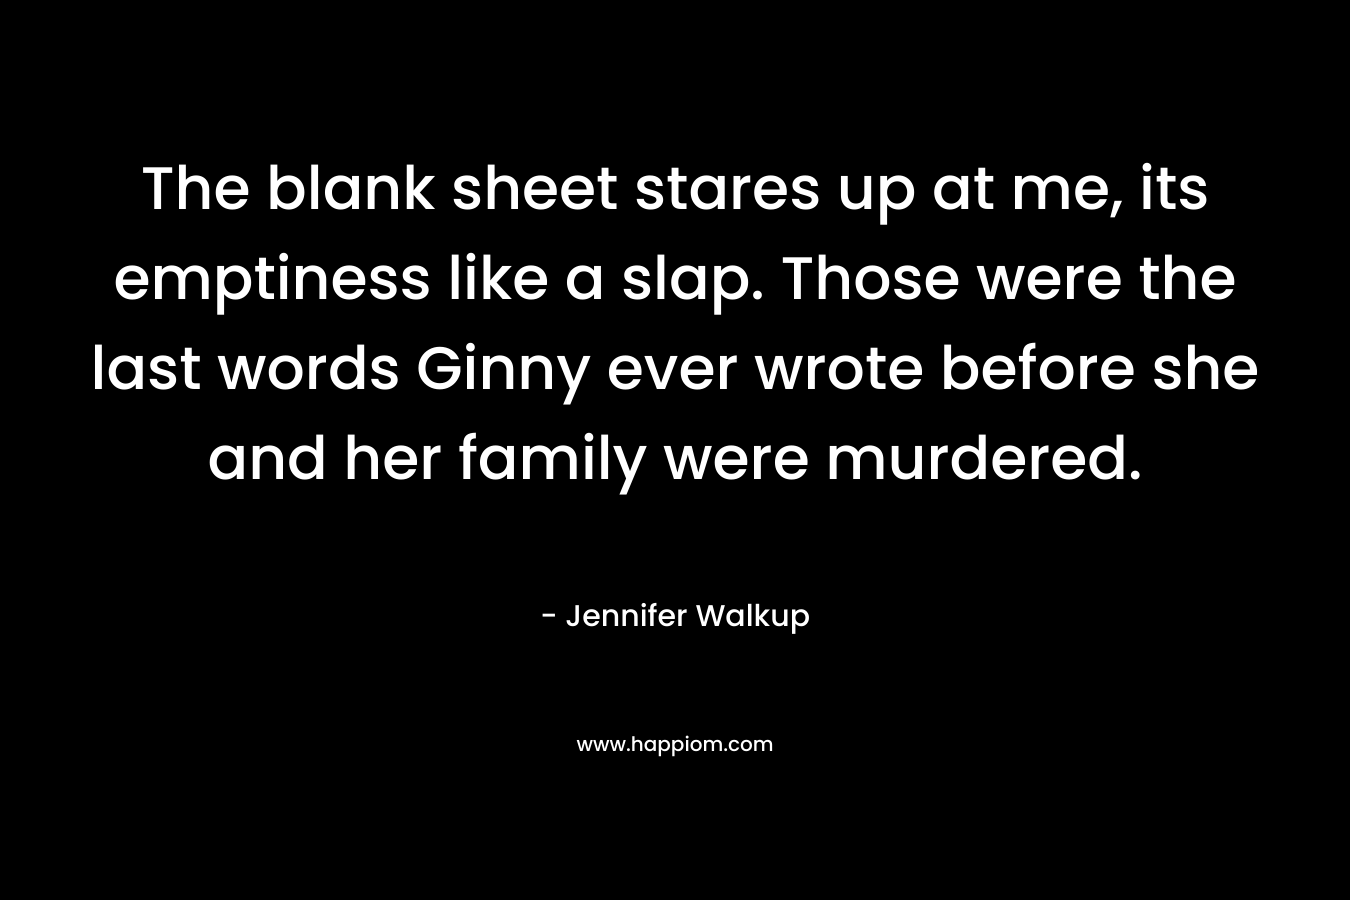 The blank sheet stares up at me, its emptiness like a slap. Those were the last words Ginny ever wrote before she and her family were murdered.